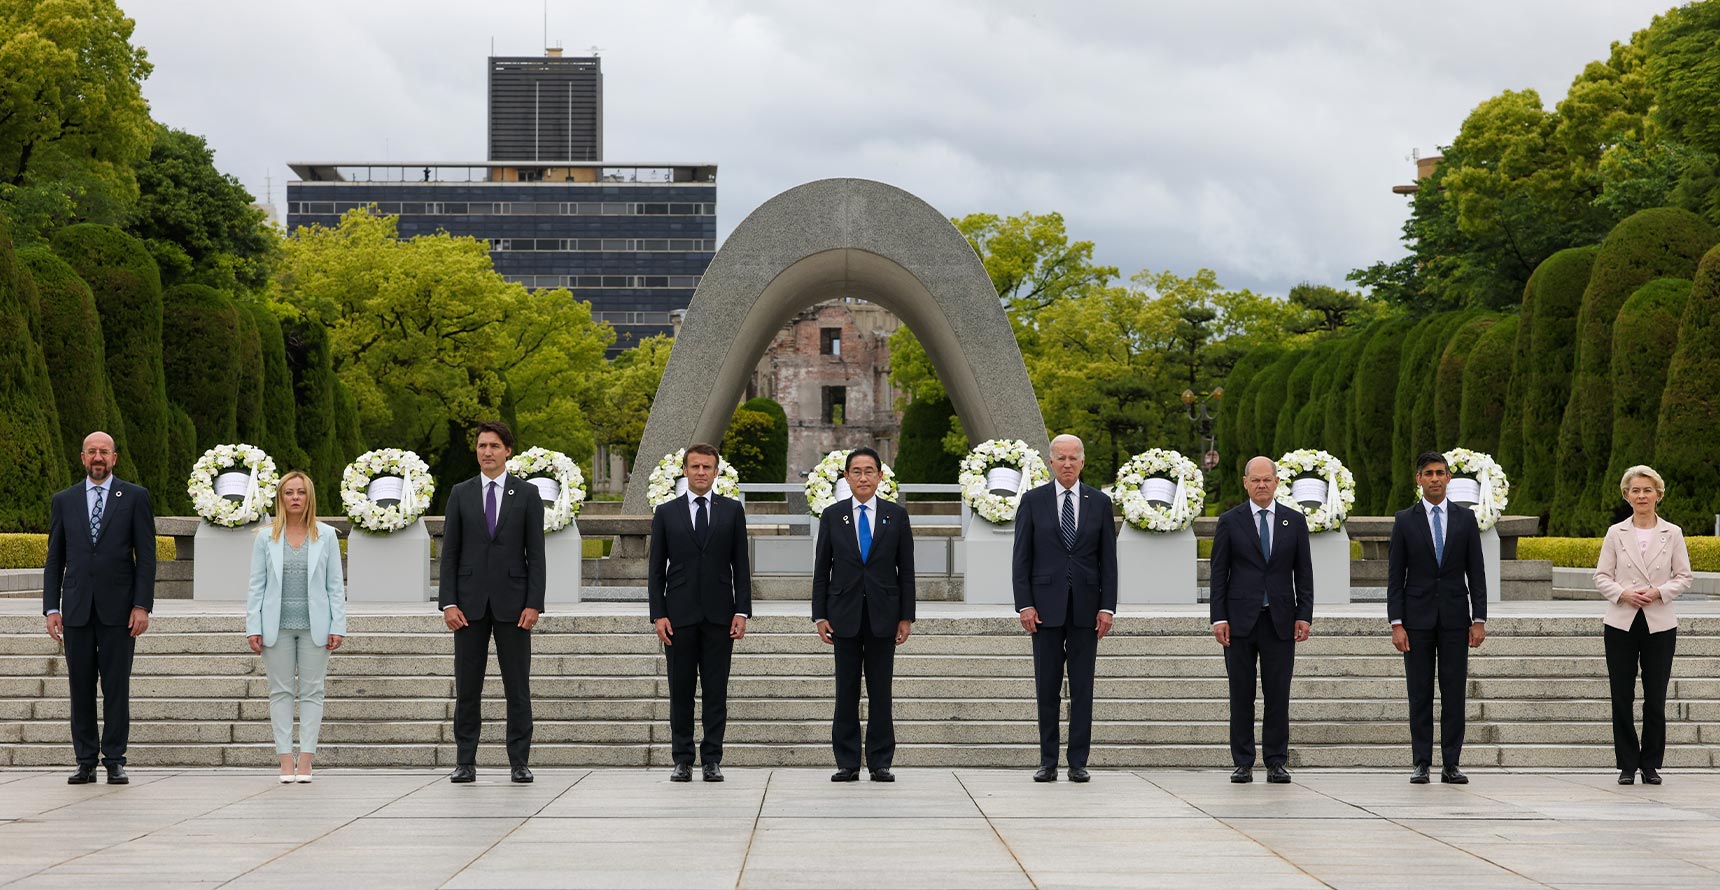 Prime Minister Rishi Sunak attends the G7 Leaders Summit in Hiroshima Japan.